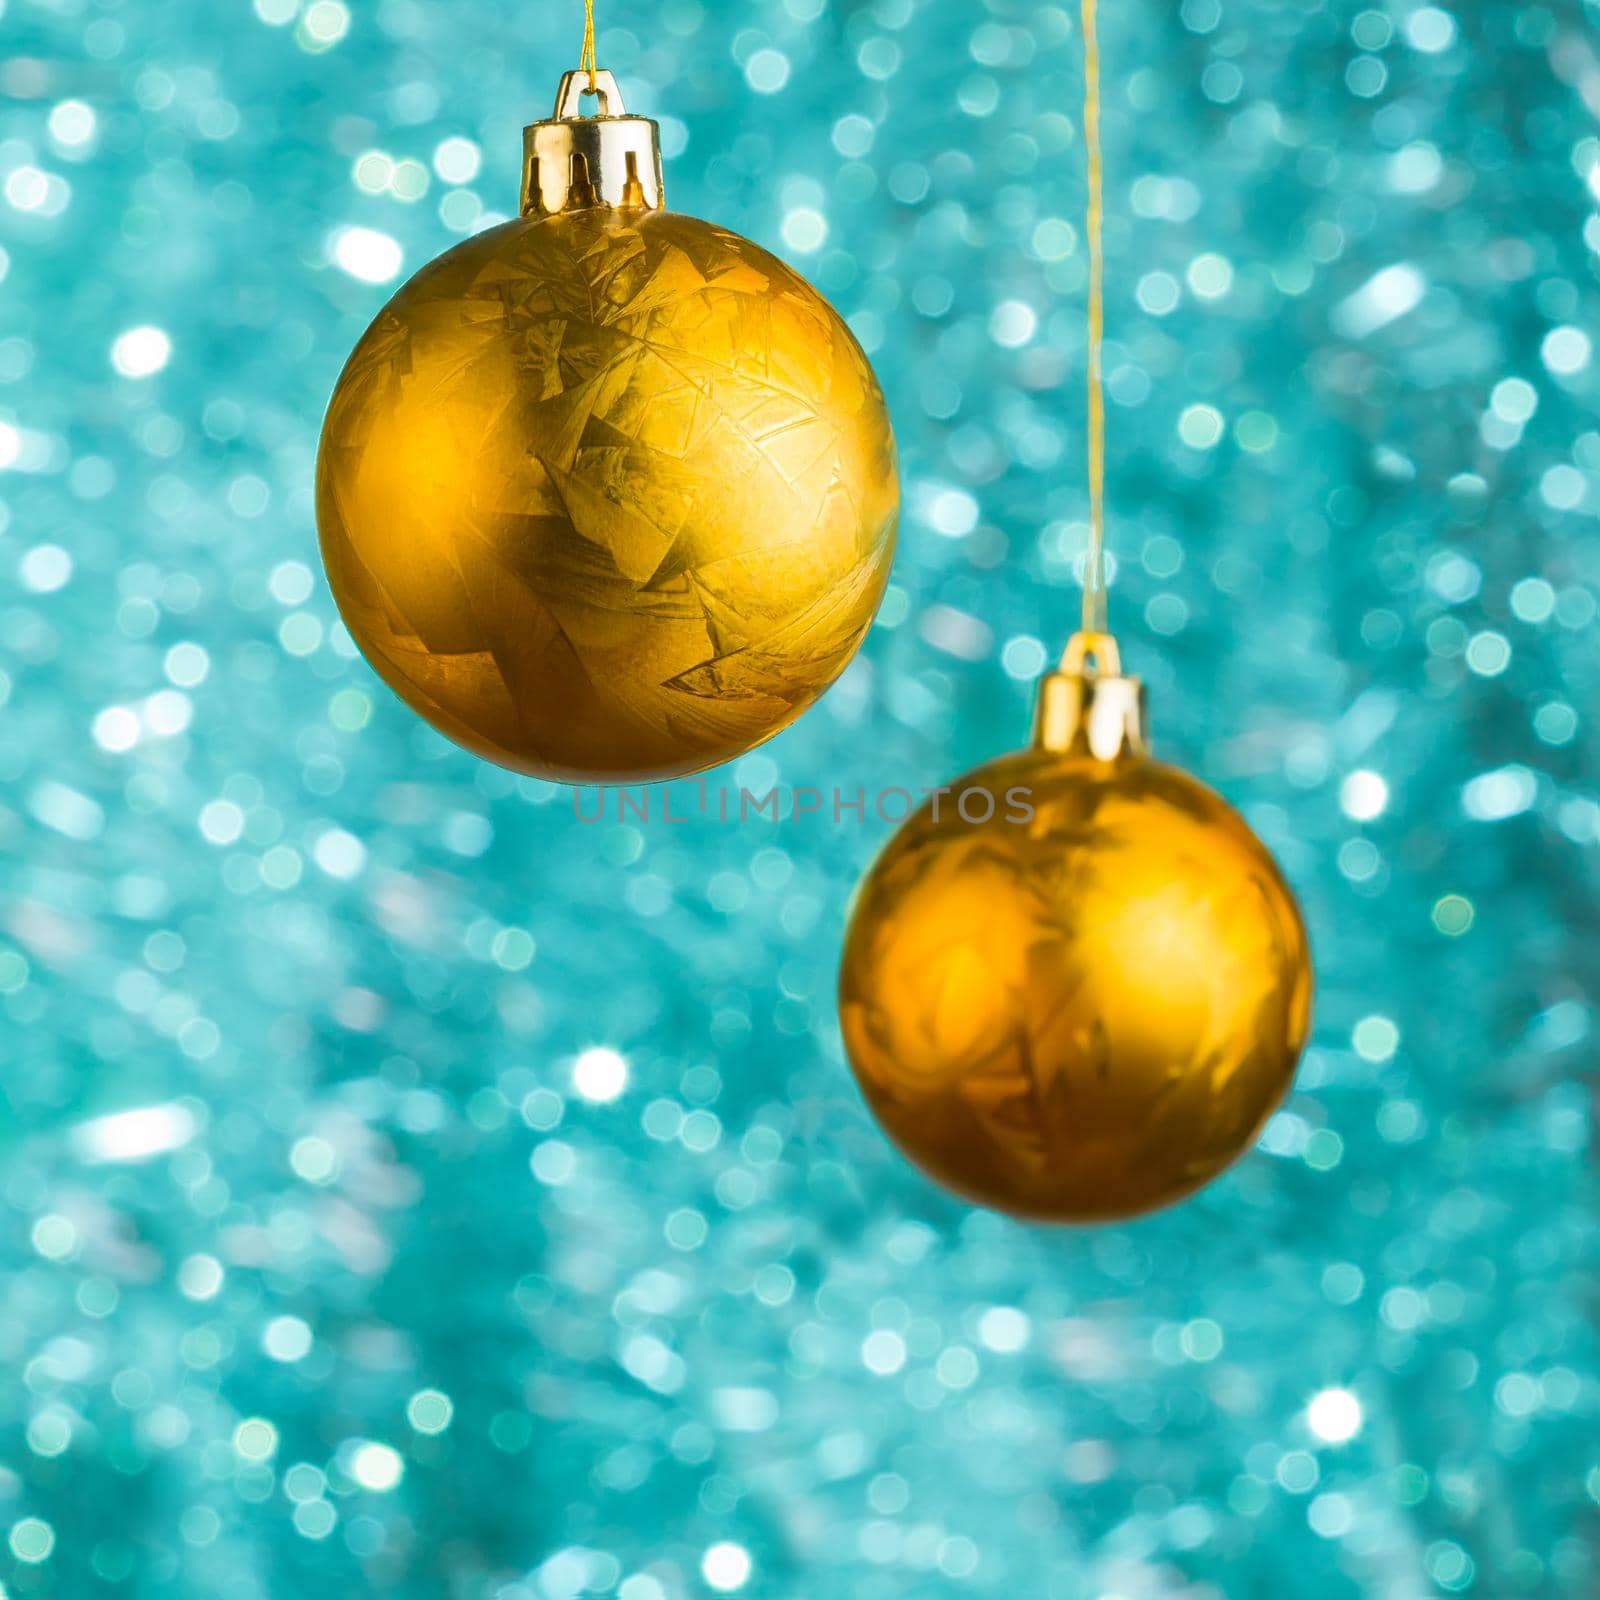 Golden Ð¡hristmas balls over blue bokeh background with copy-space